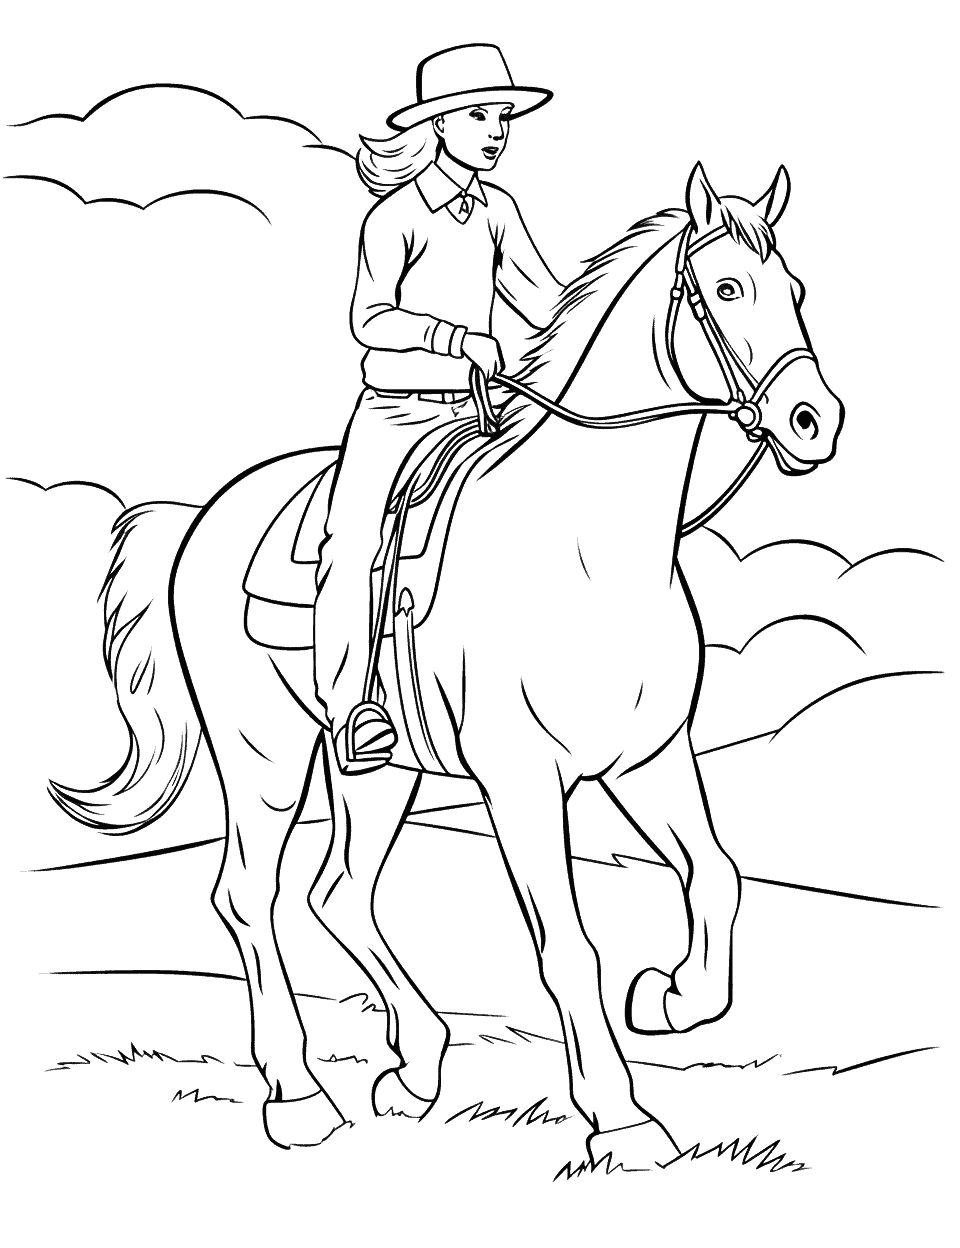 Western Rodeo Scene Coloring Page - A thrilling western rodeo scene with a horse and its rider.